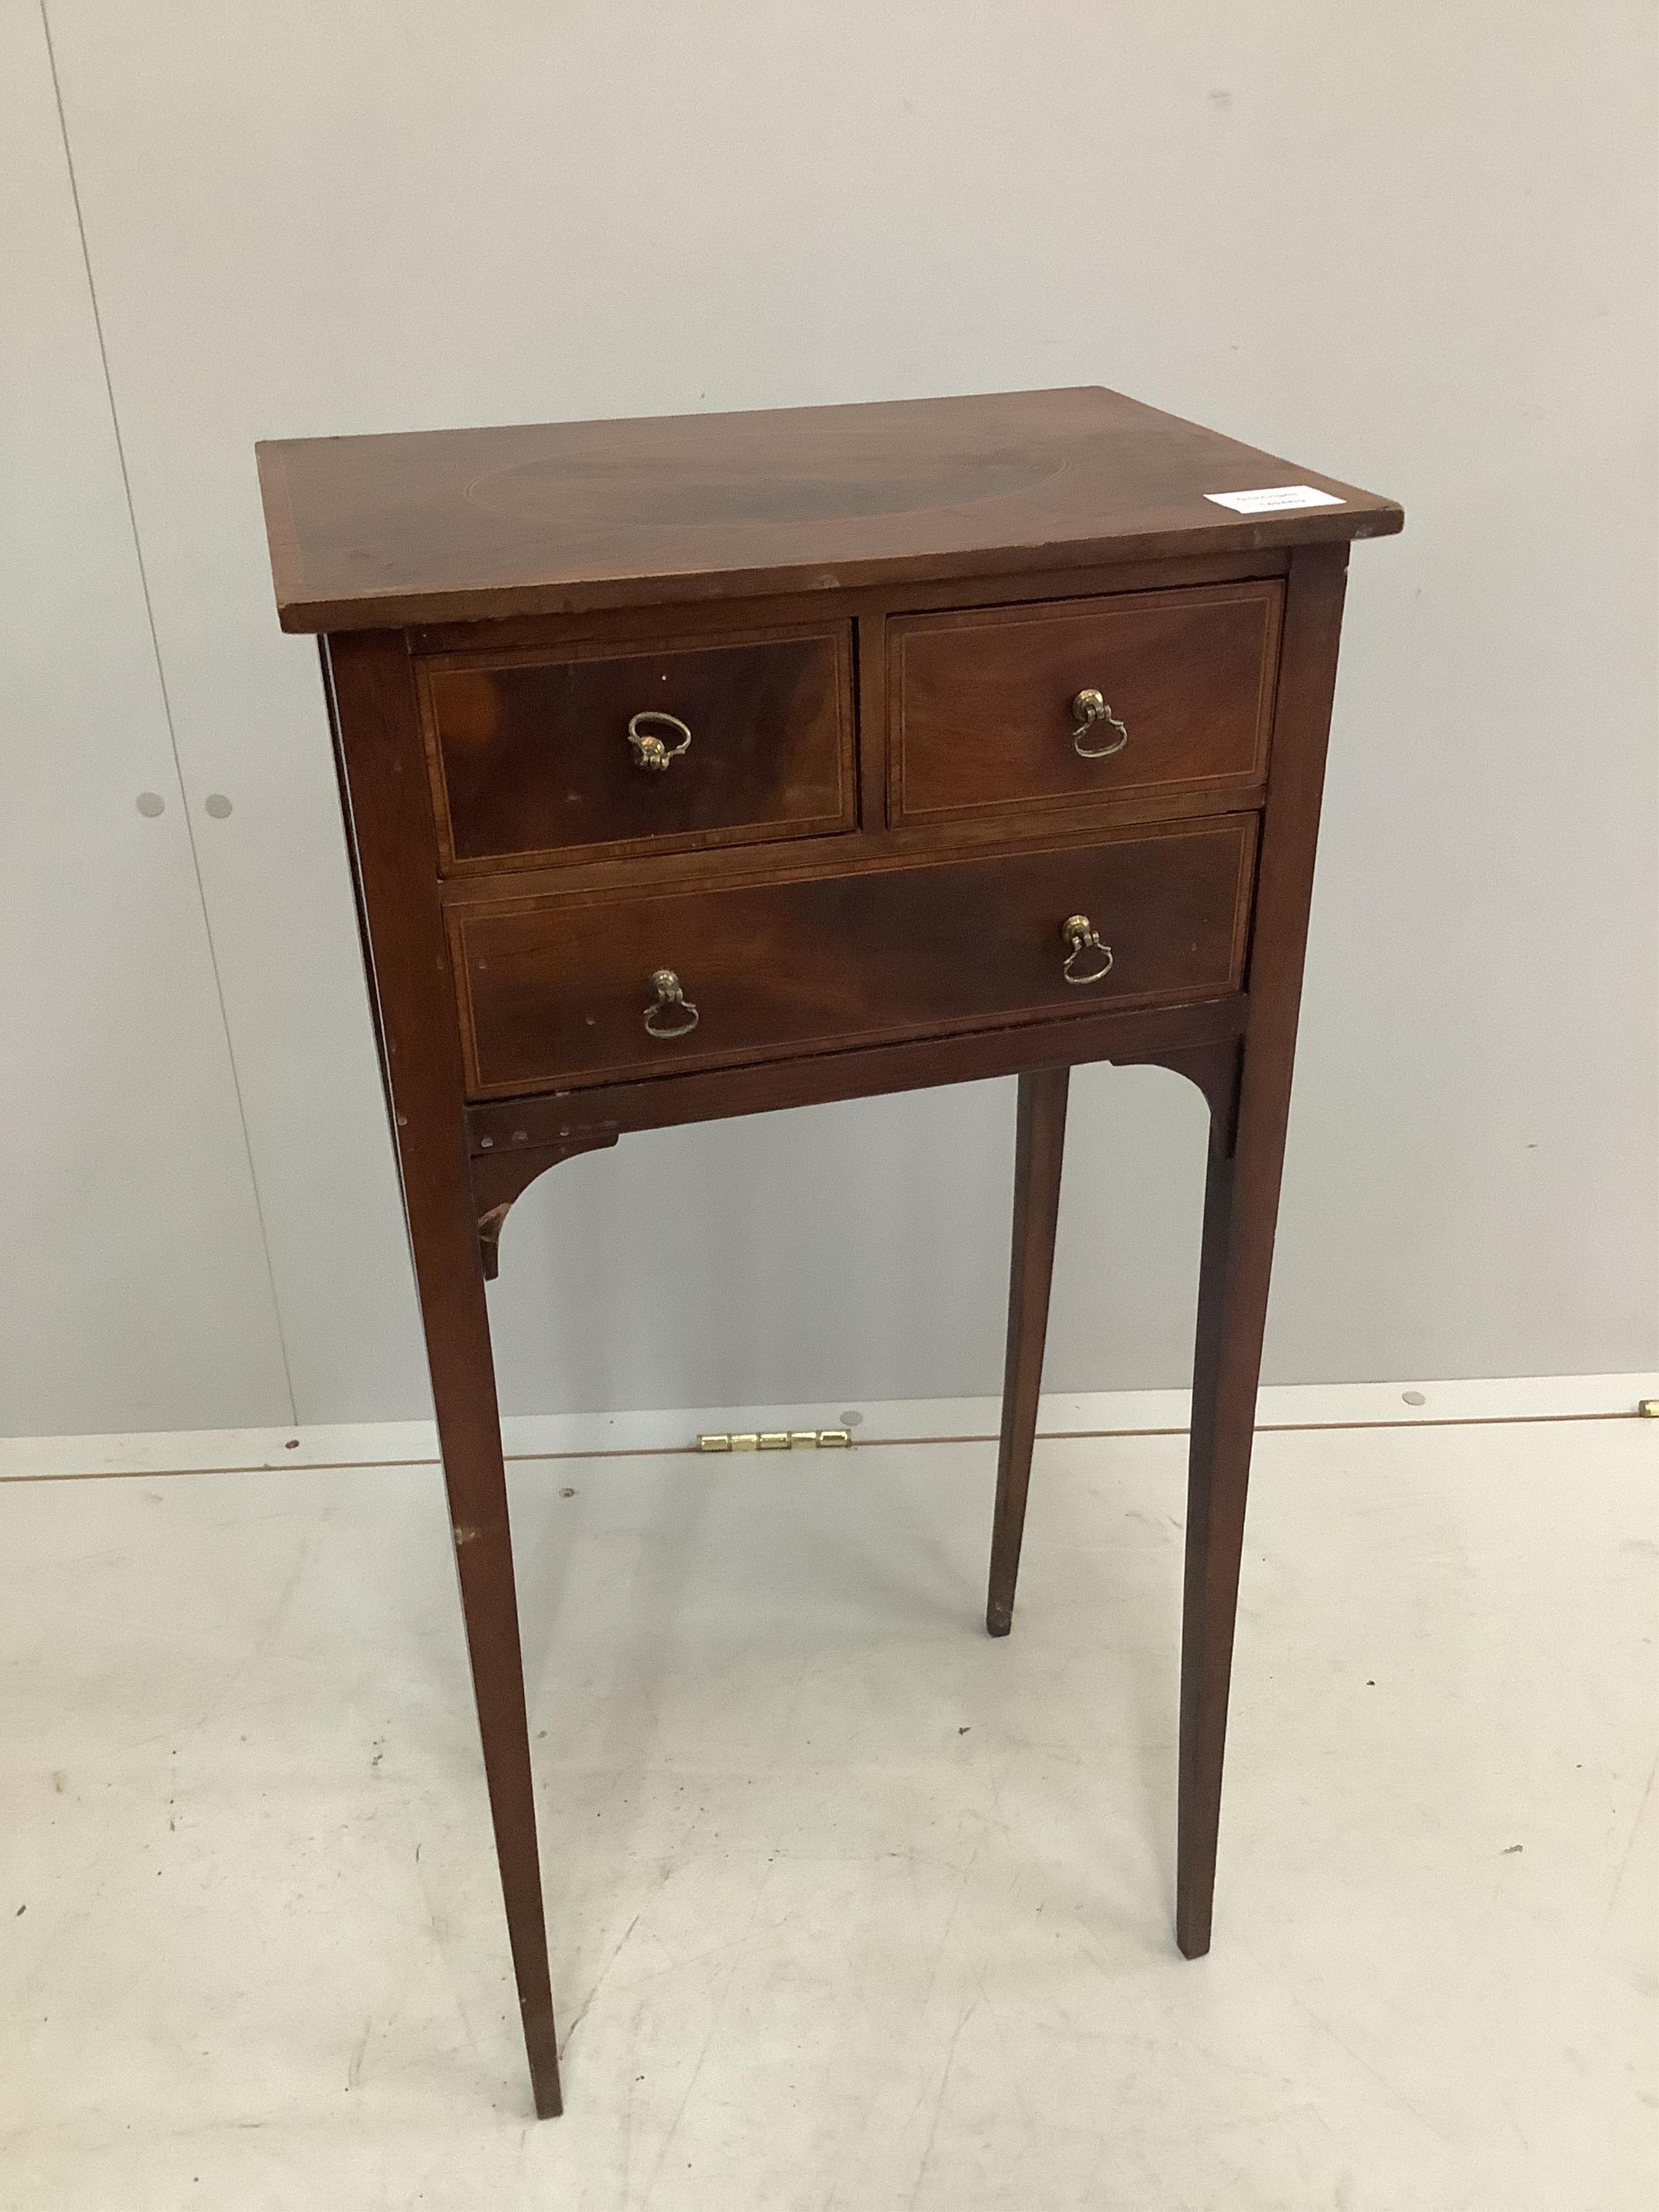 A small George III style inlaid mahogany three drawer occasional table, width 38cm, depth 28cm, height 73cm. Condition - fair